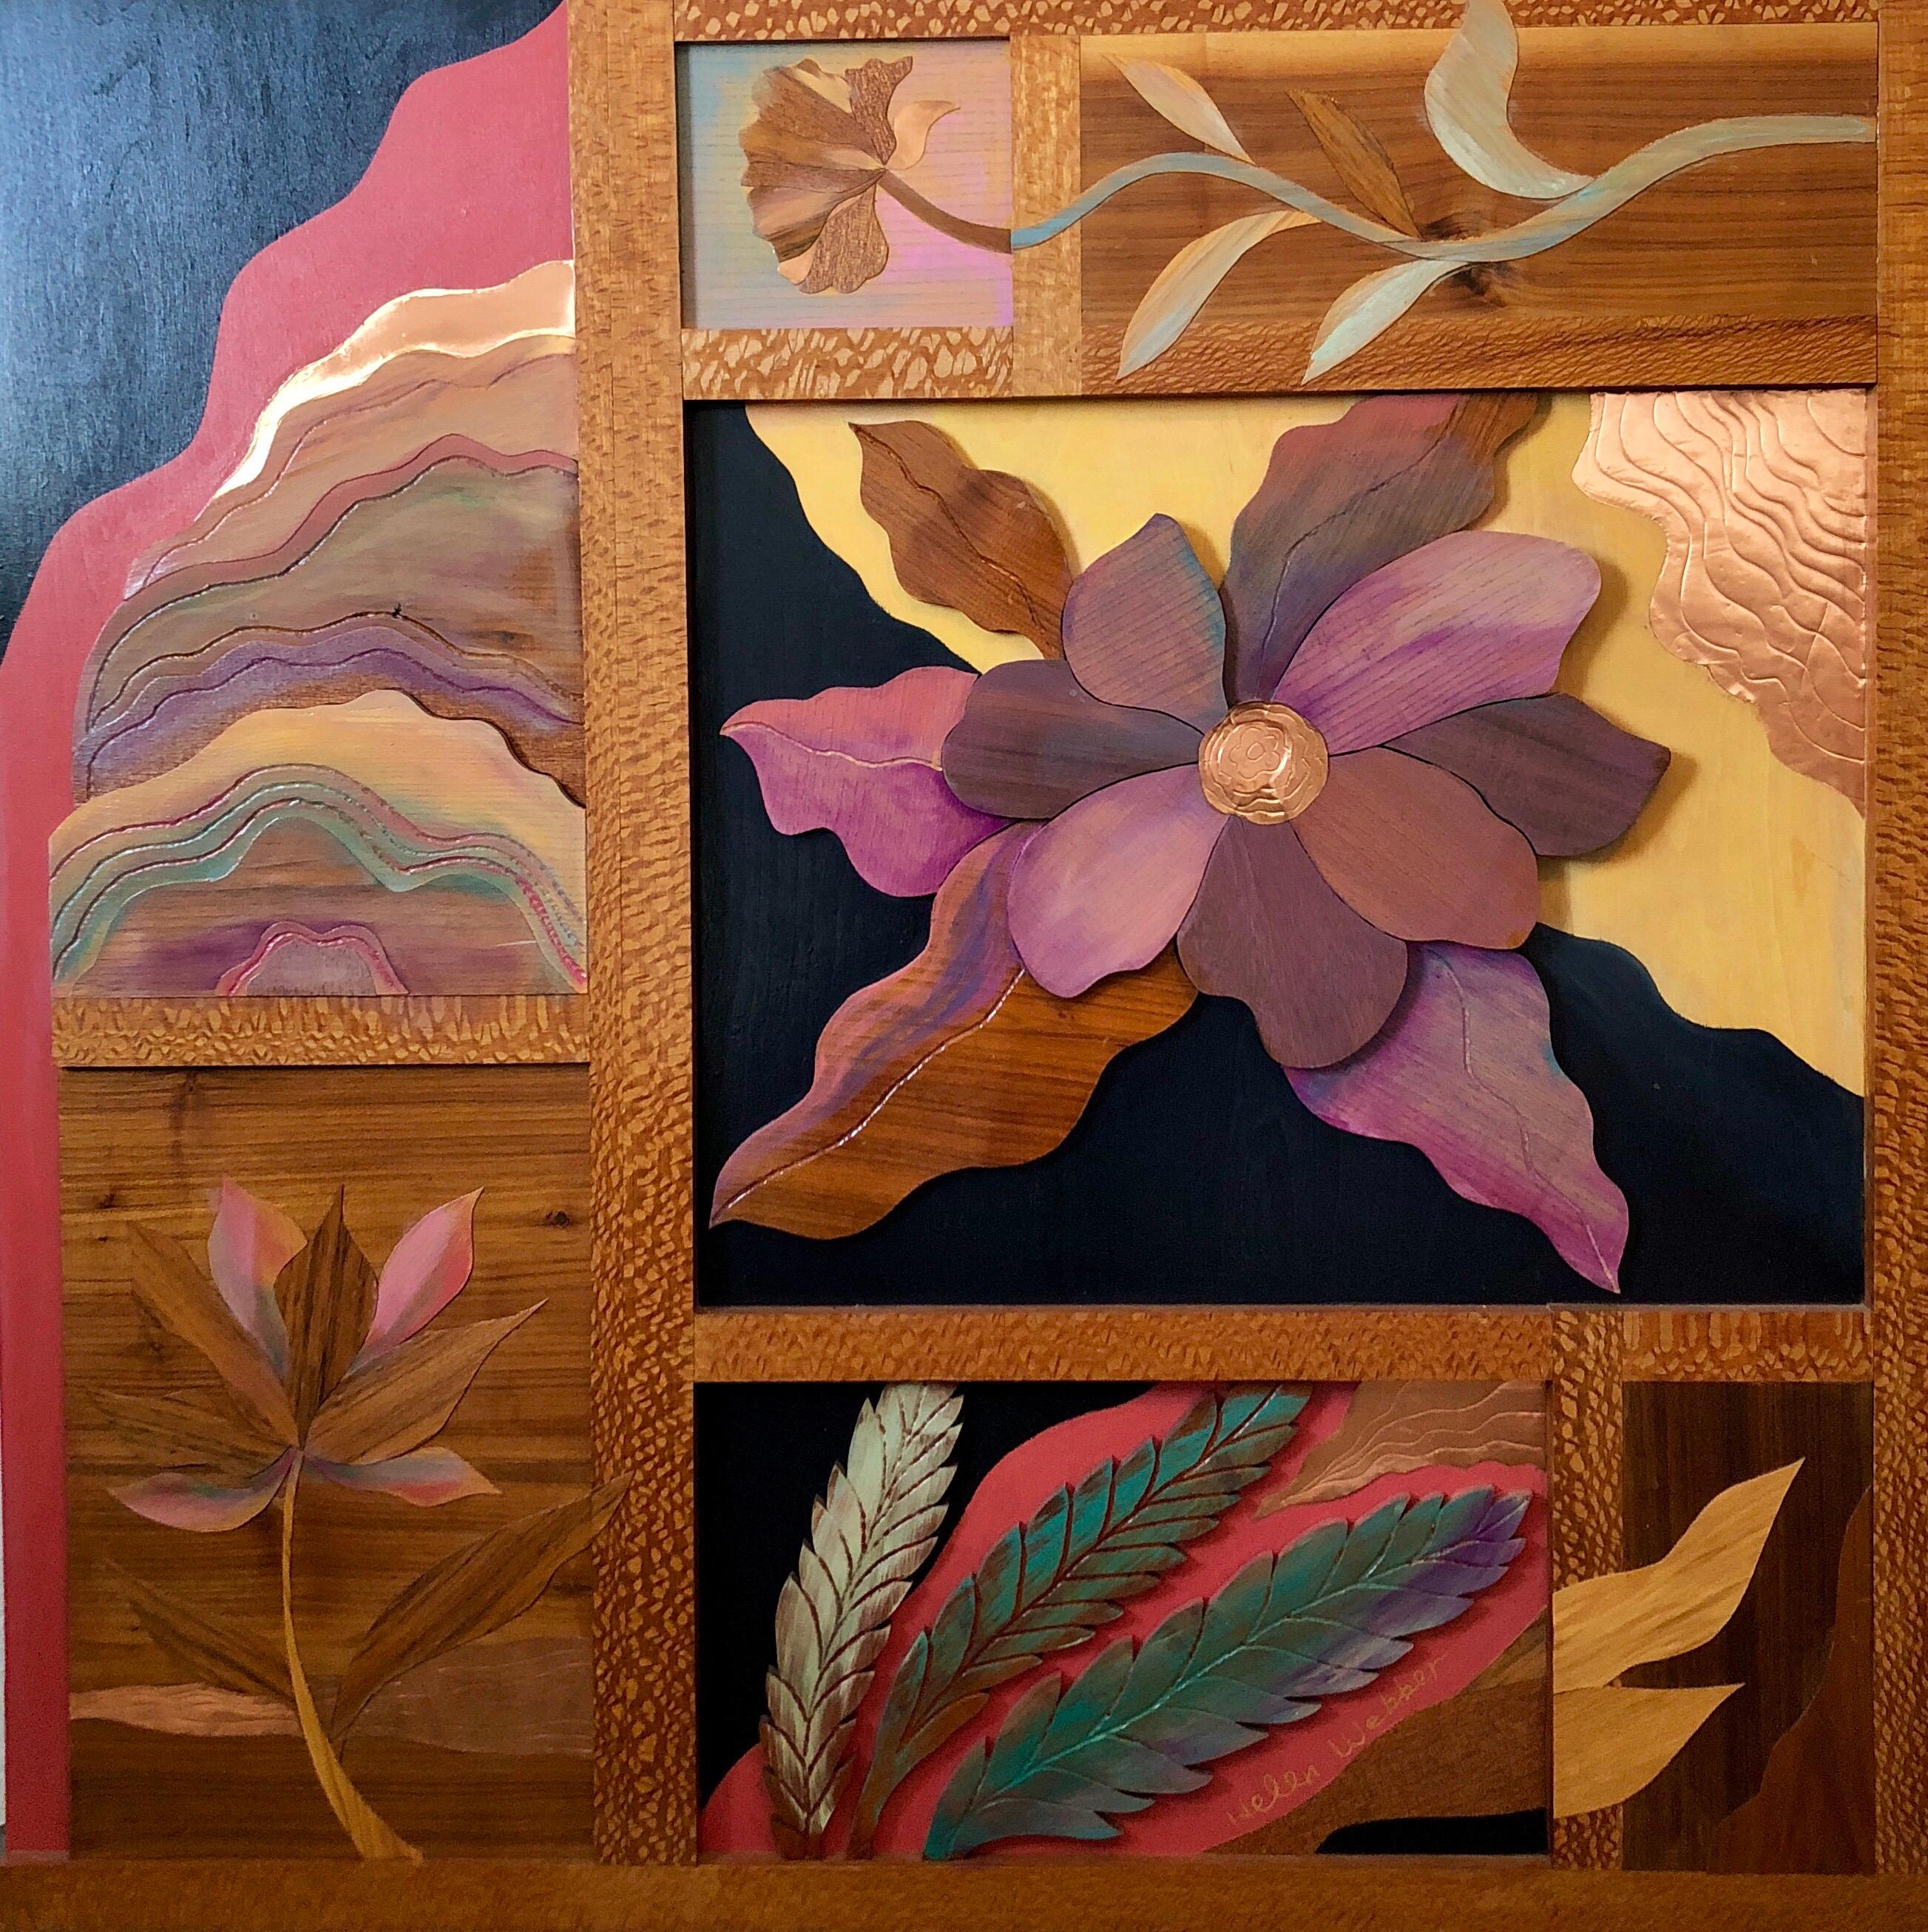 1970s  Large Wood, Copper Inlay Sculpture Wall Relief Tropical Flowers Motif For Sale 4